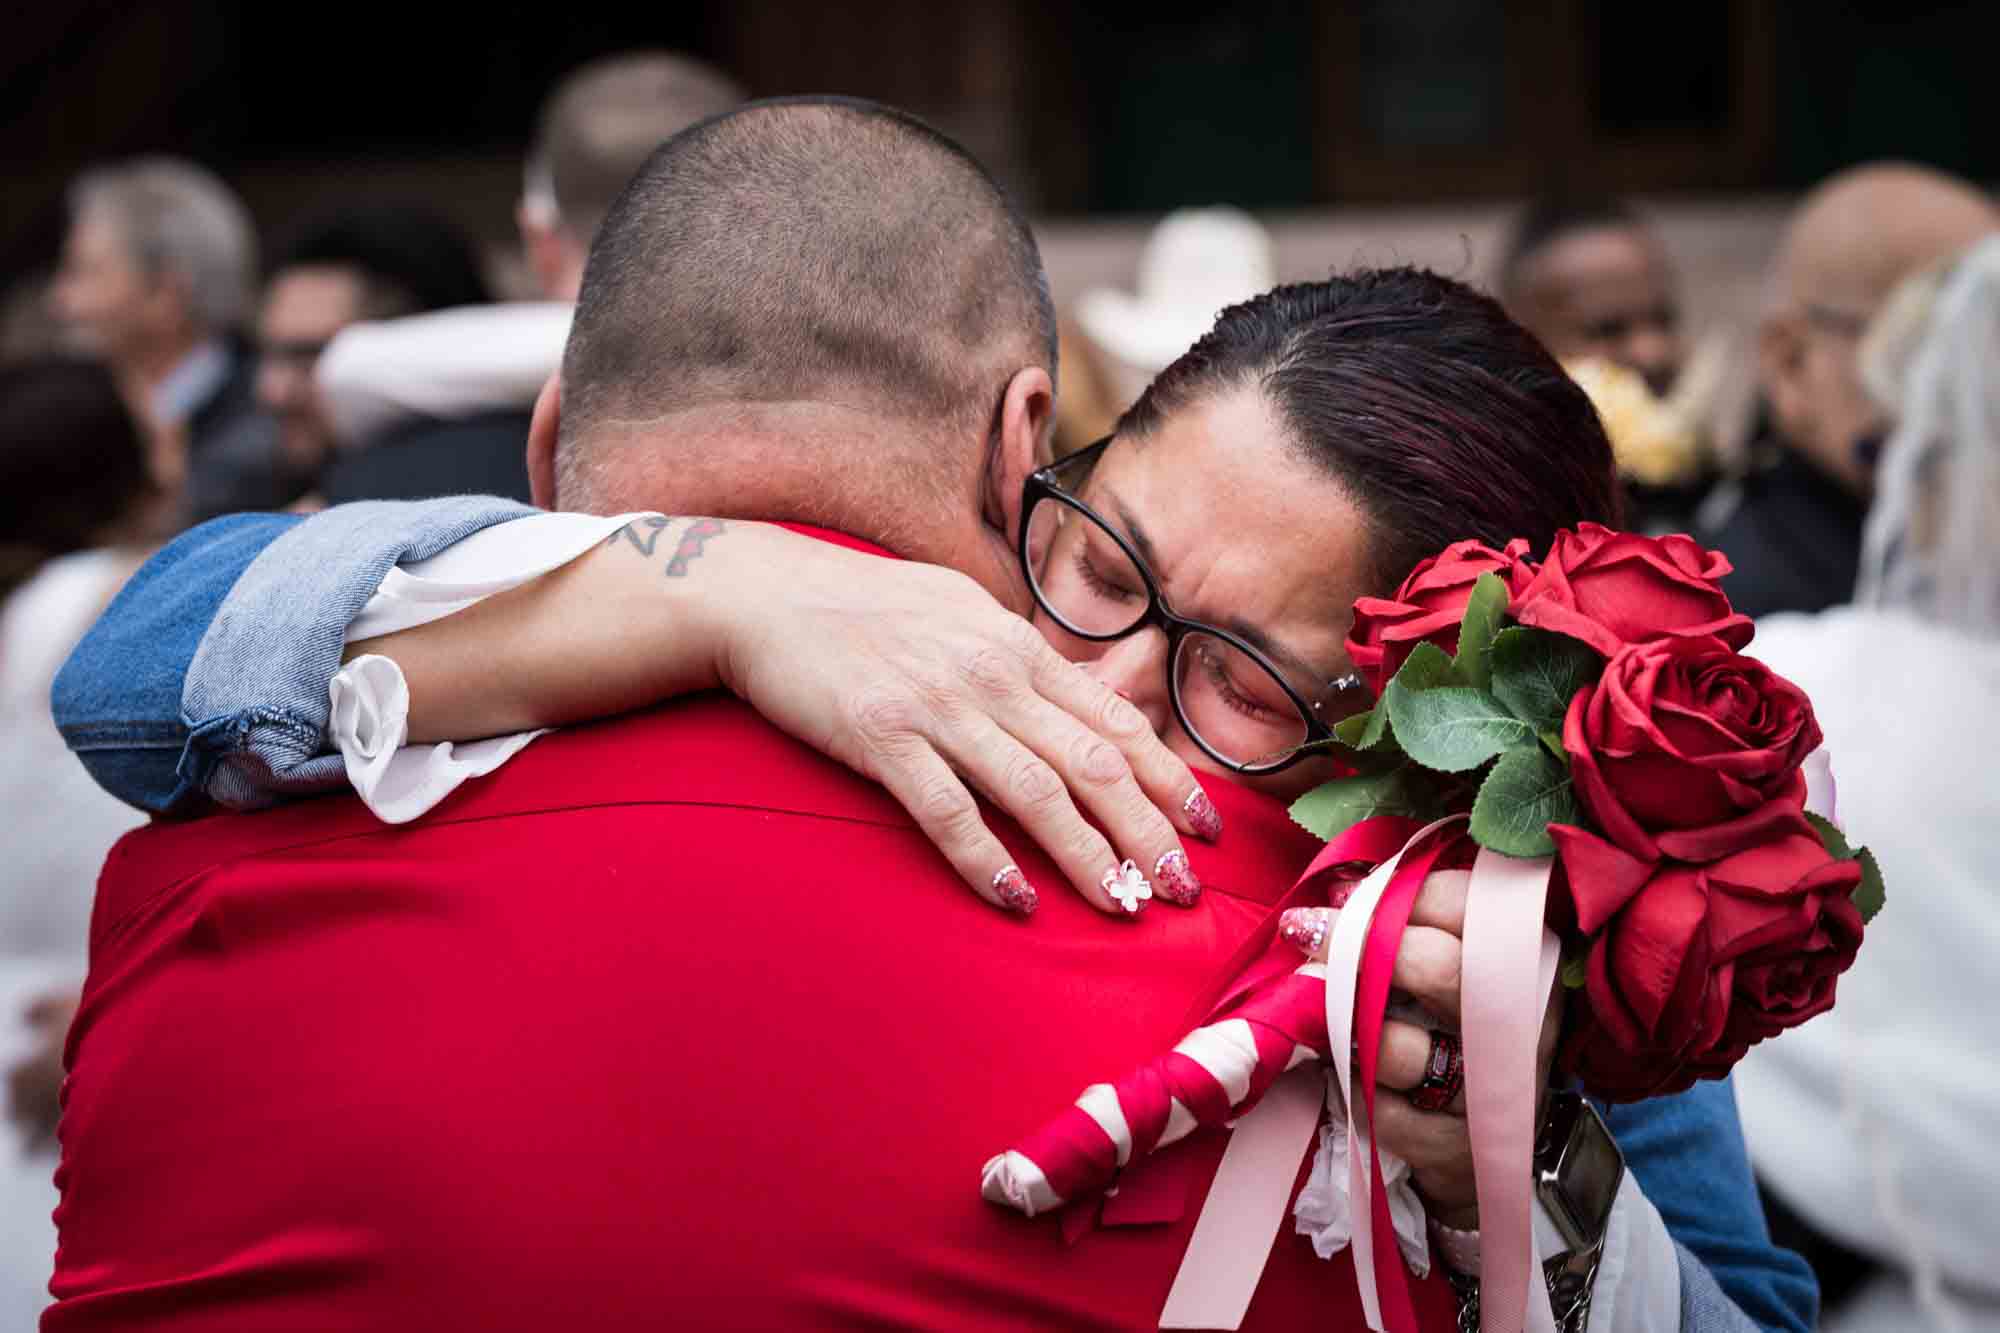 Woman with red flower bouquet crying and holding onto groom wearing red shirt for an article on the Bexar county mass wedding event